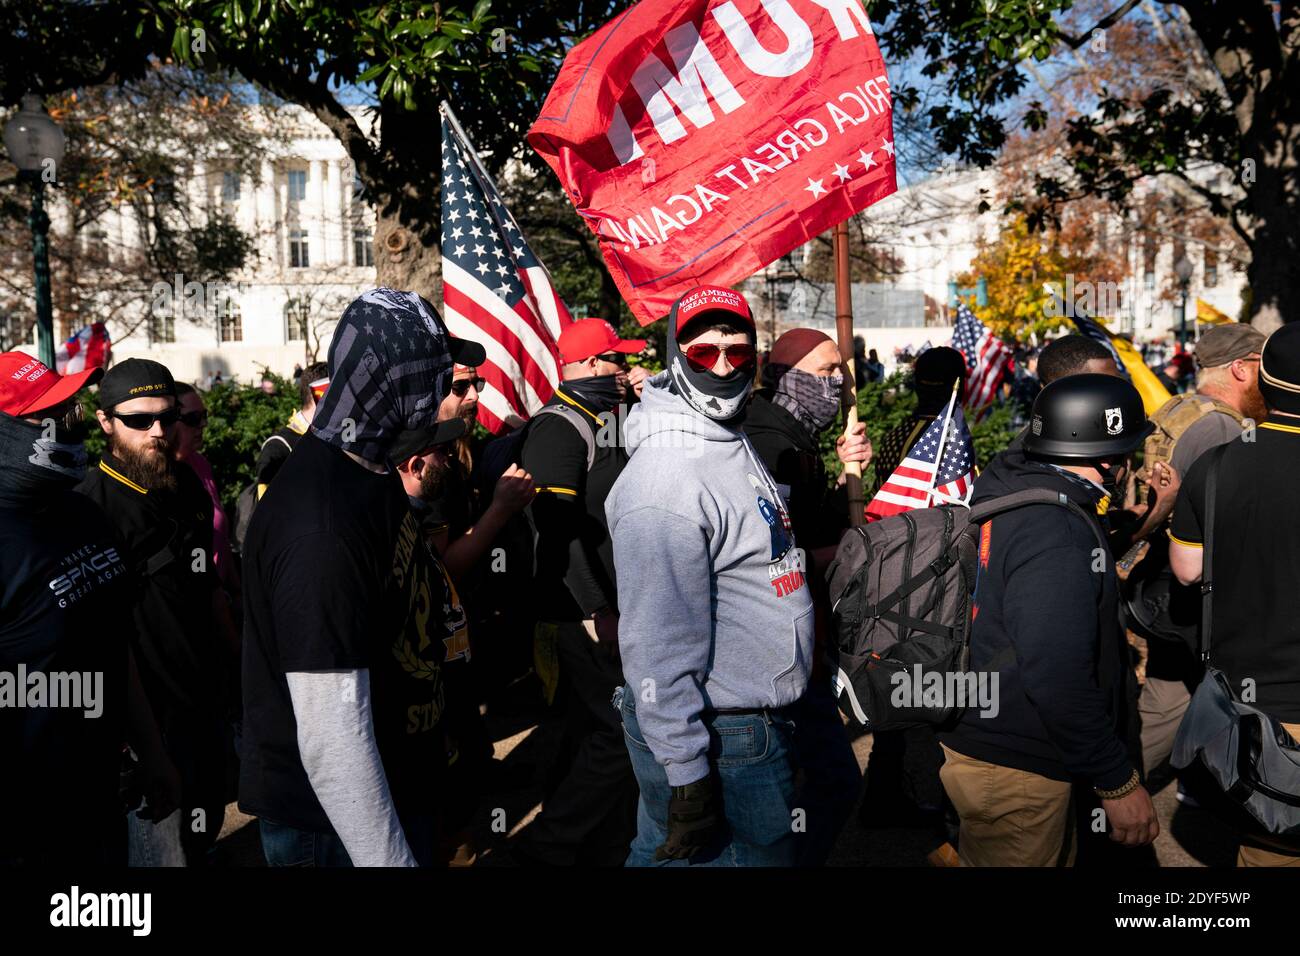 Members of the proud boys are seen at a gathering during the 'Million MAGA March' at Freedom Plaza in Washington, D.C., U.S., on Saturday, Nov. 14, 2020. The rally comes one week after news organizations projected Joe Biden as the winner of the 2020 election and President Trumps refusal to acknowledge he lost. Credit: Alex Edelman/The Photo Access Stock Photo